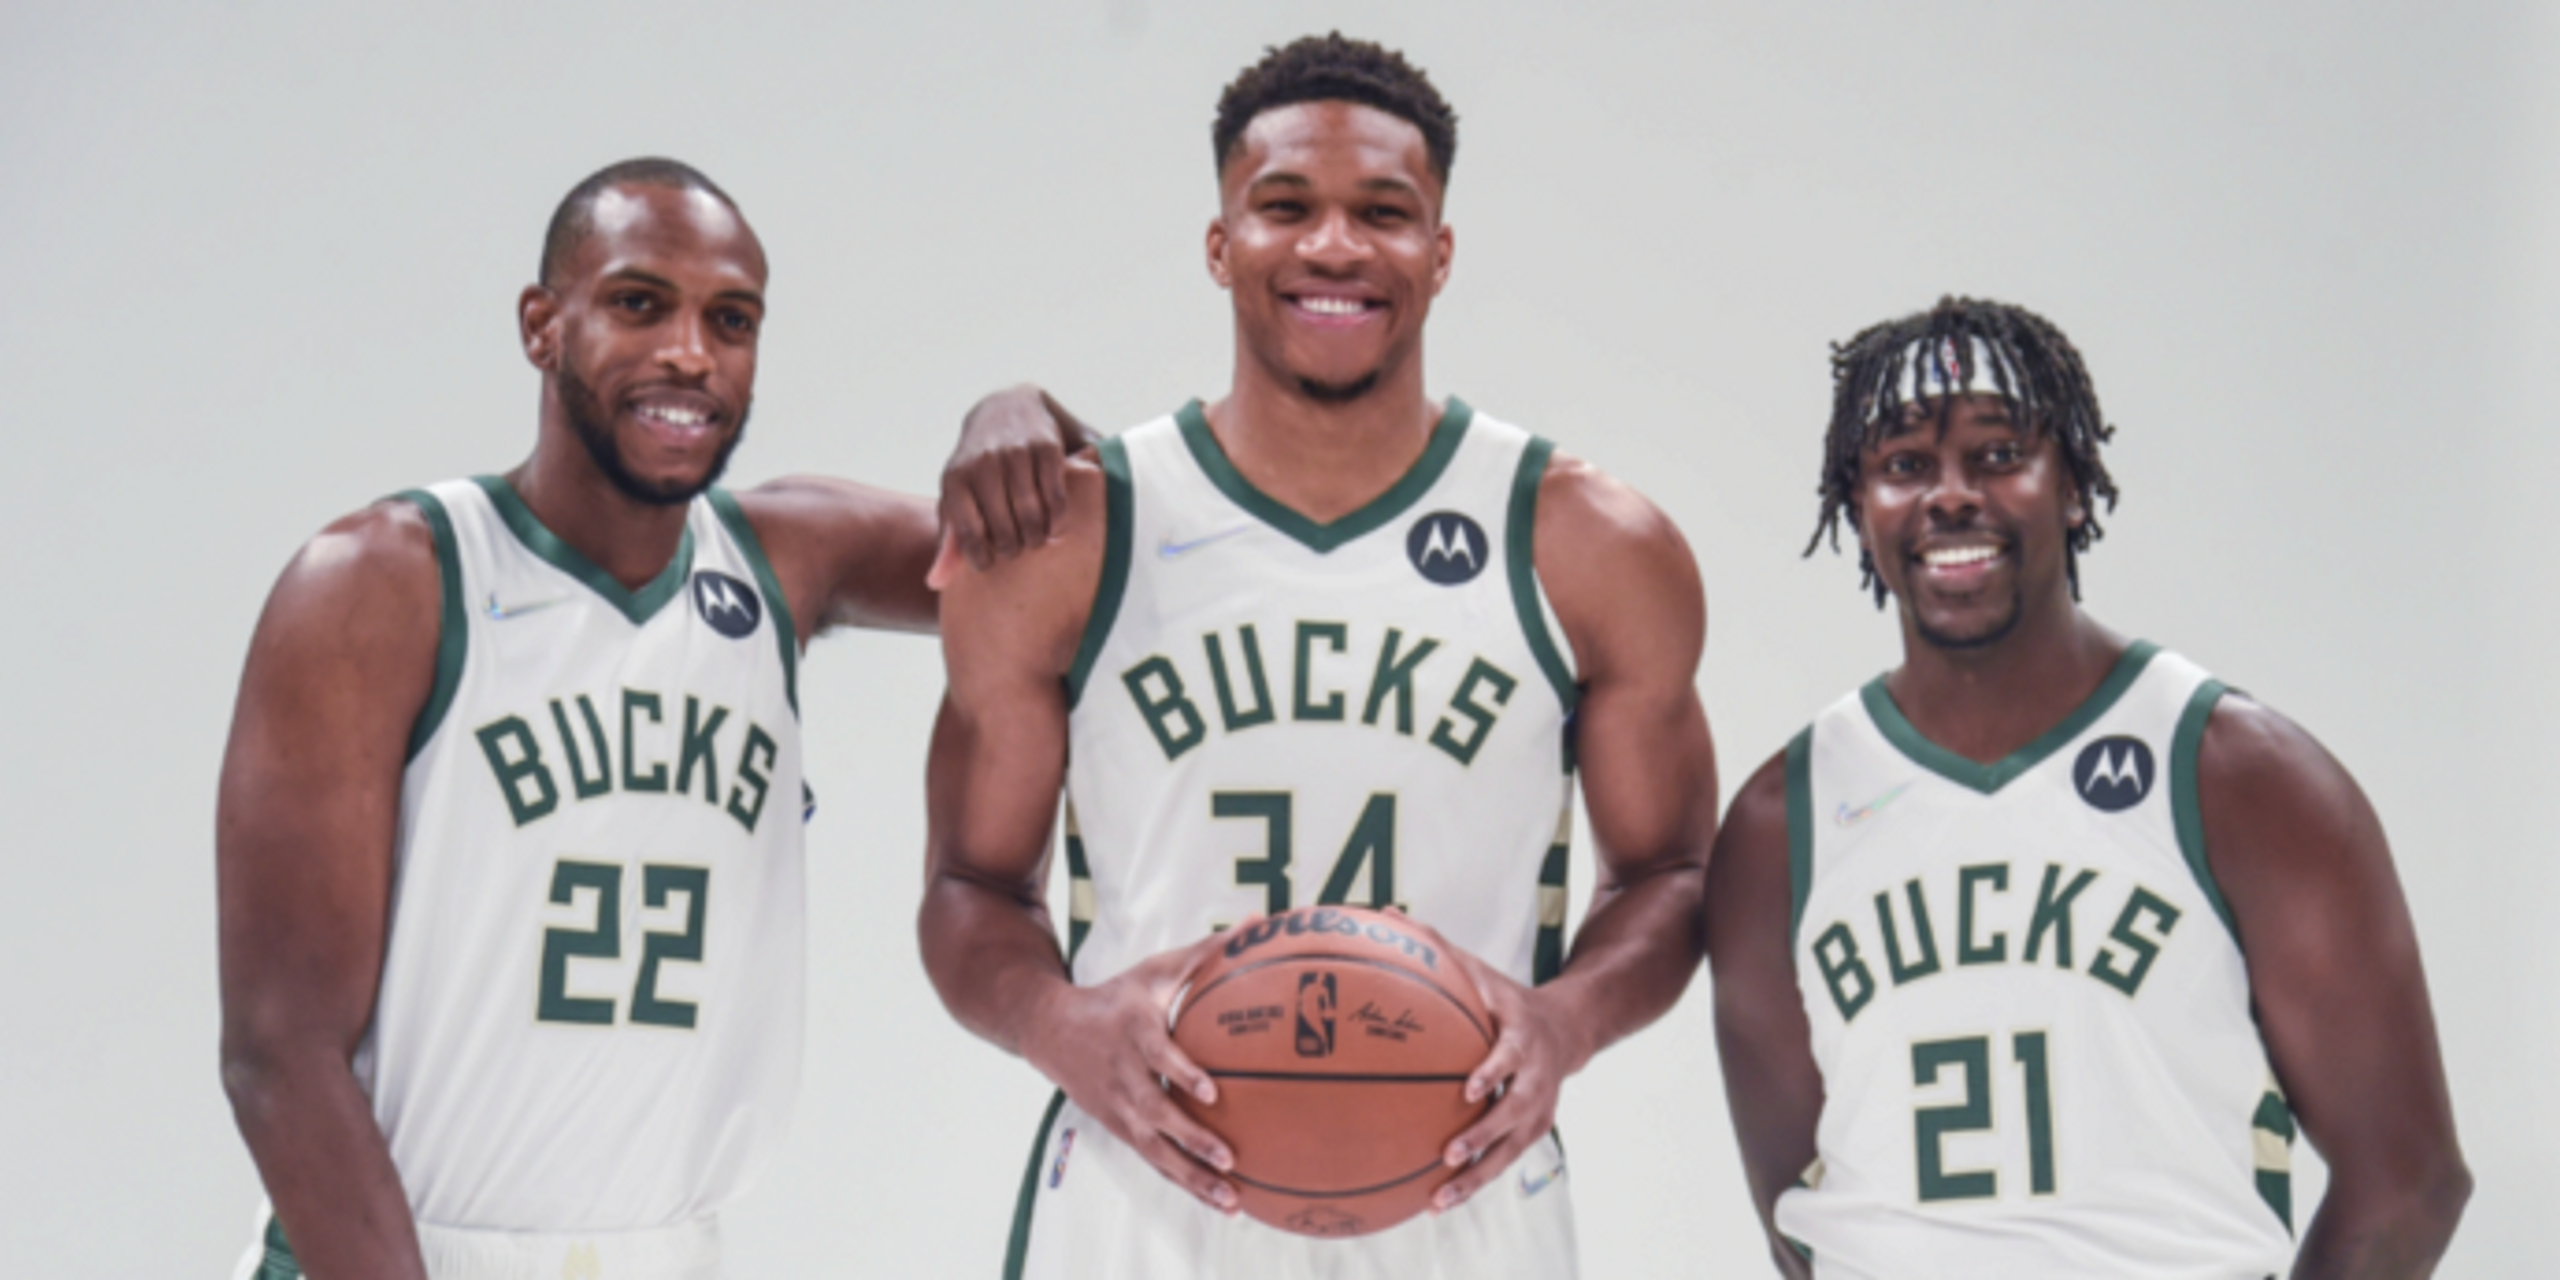 Explain one play: The Bucks and the power of three